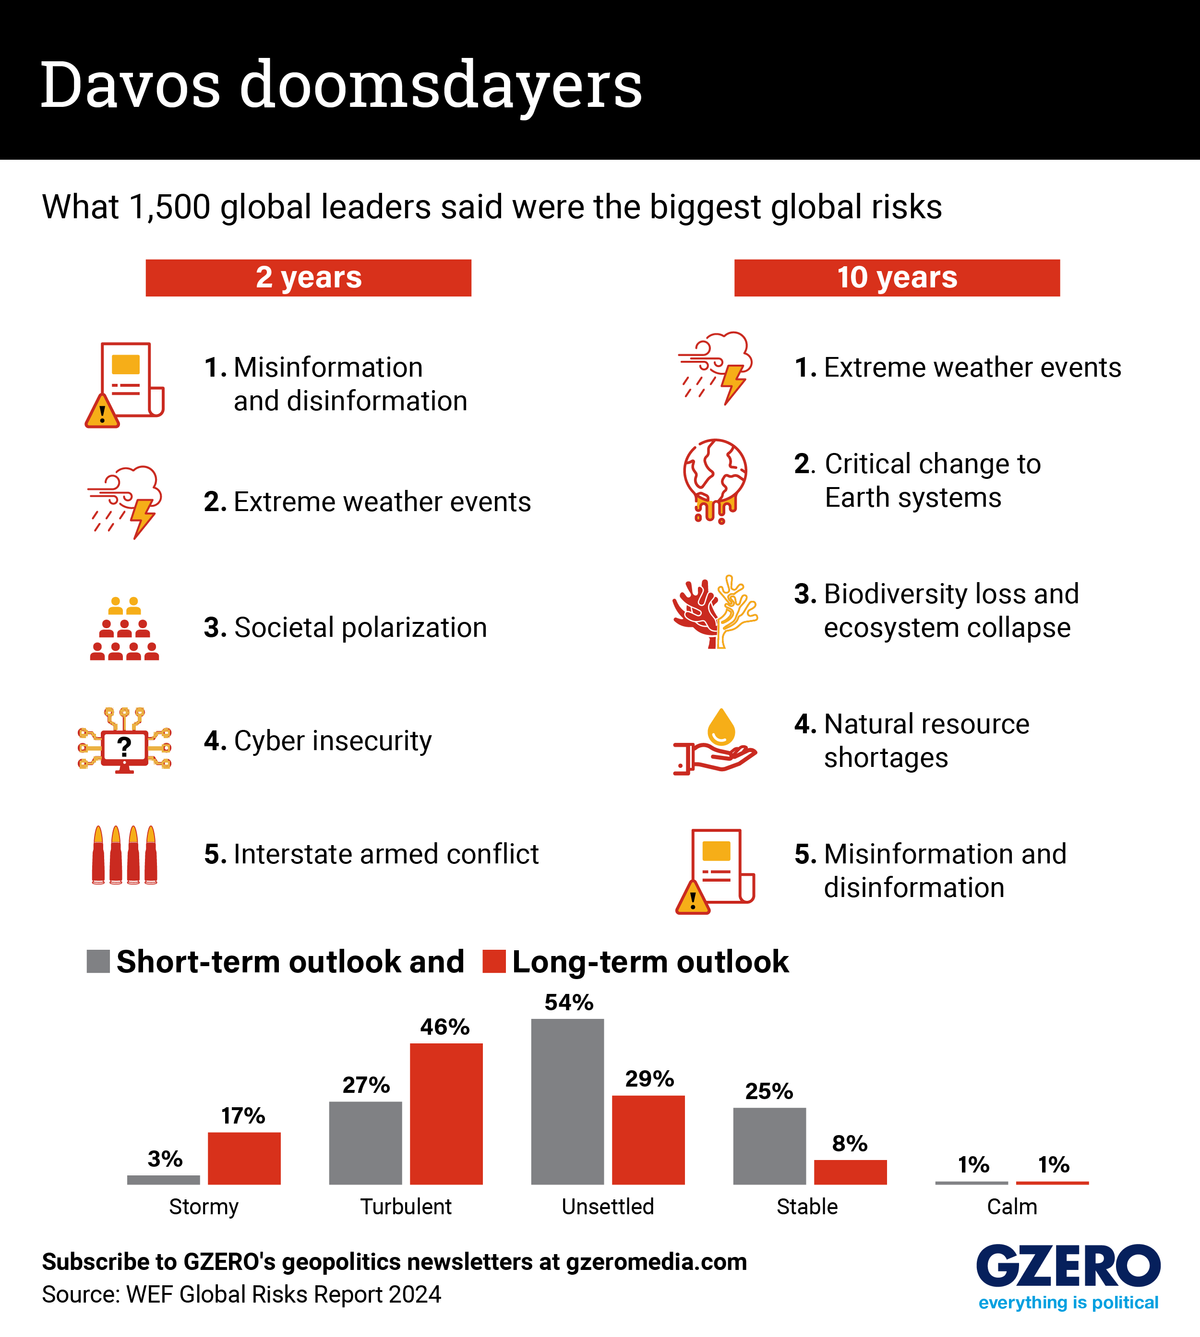 Graphic Truth: Davos doomsdayers